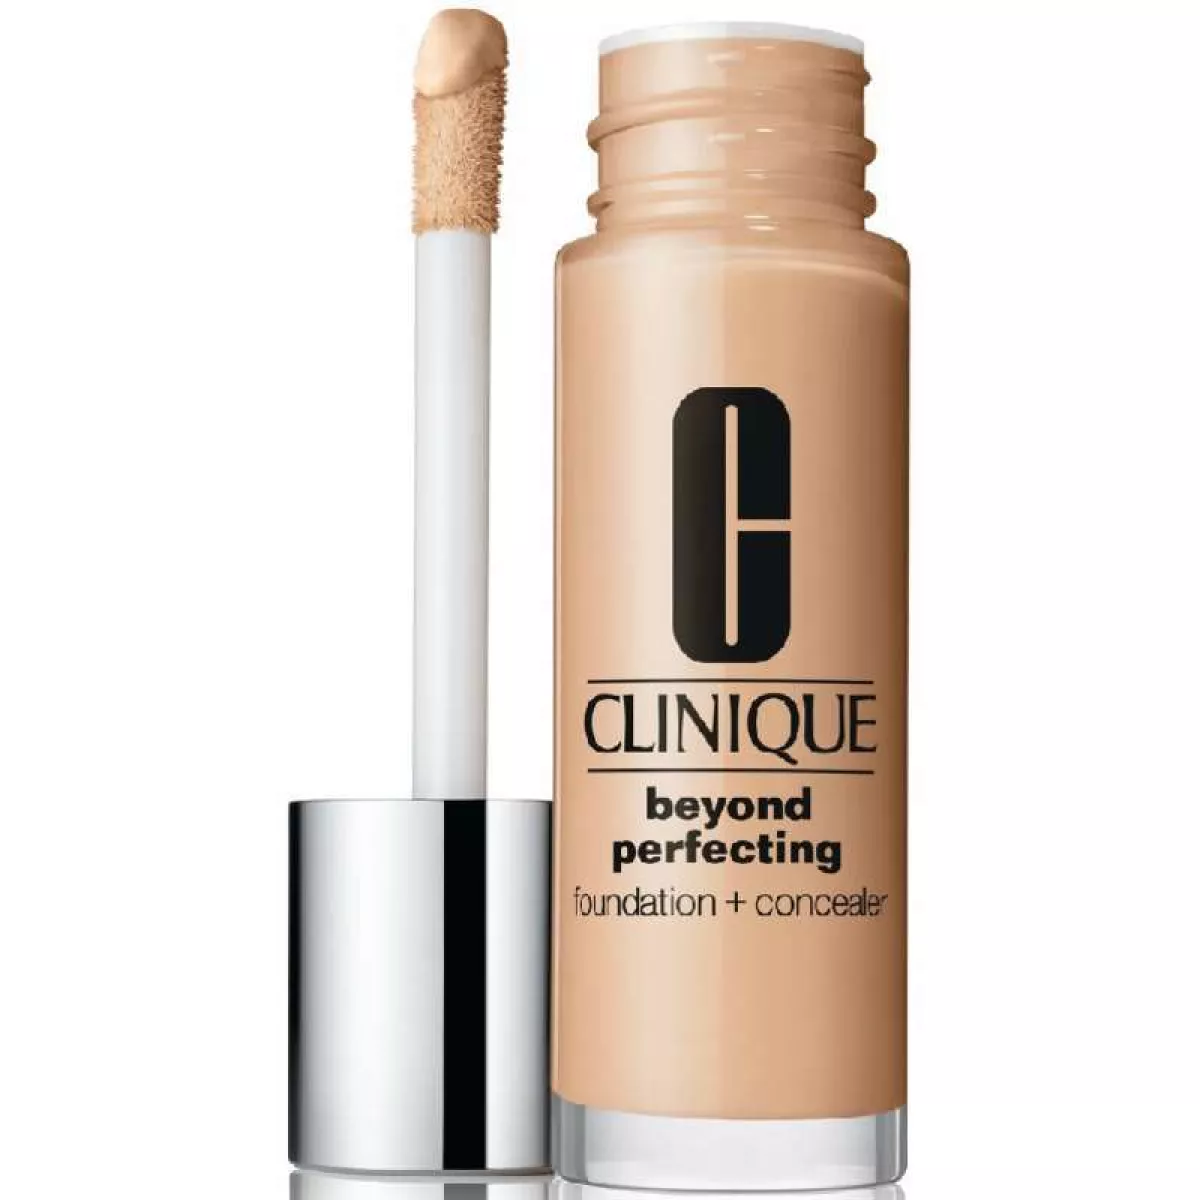 #1 - Clinique Beyond Perfecting Foundation + Concealer 30 ml - Neutral